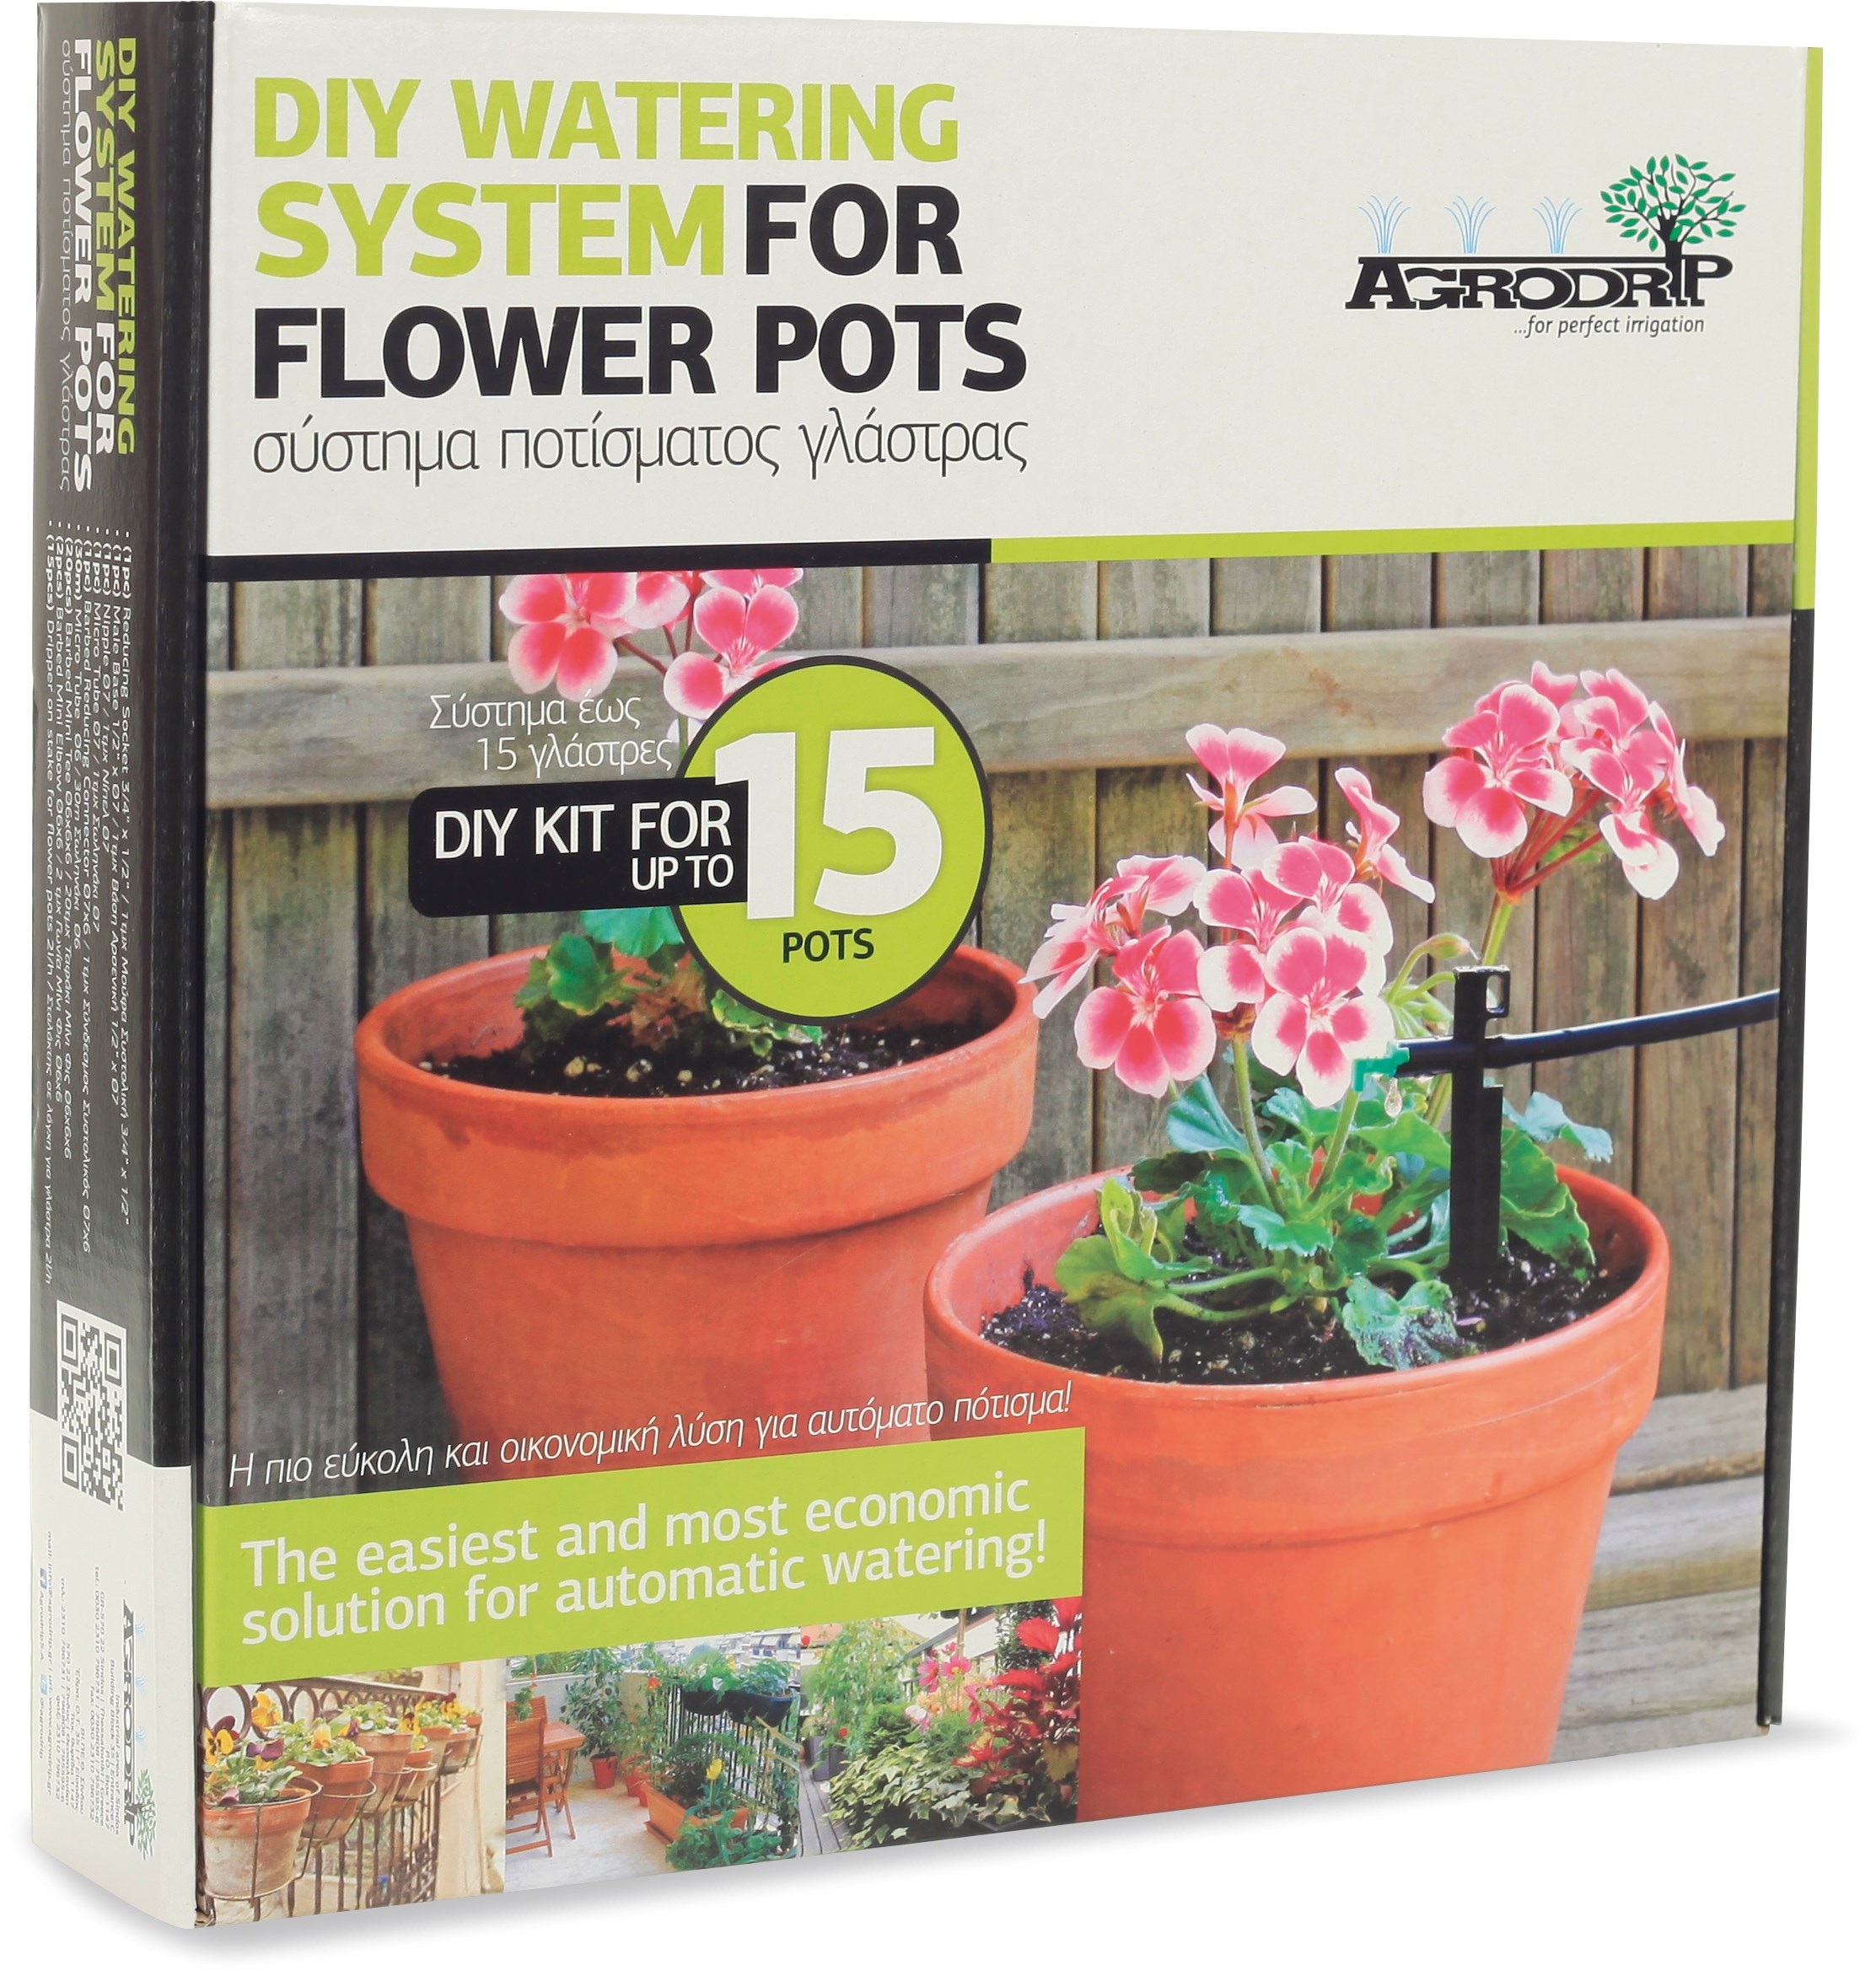 Agrodrip DIY watering system for up to 15 flower pots